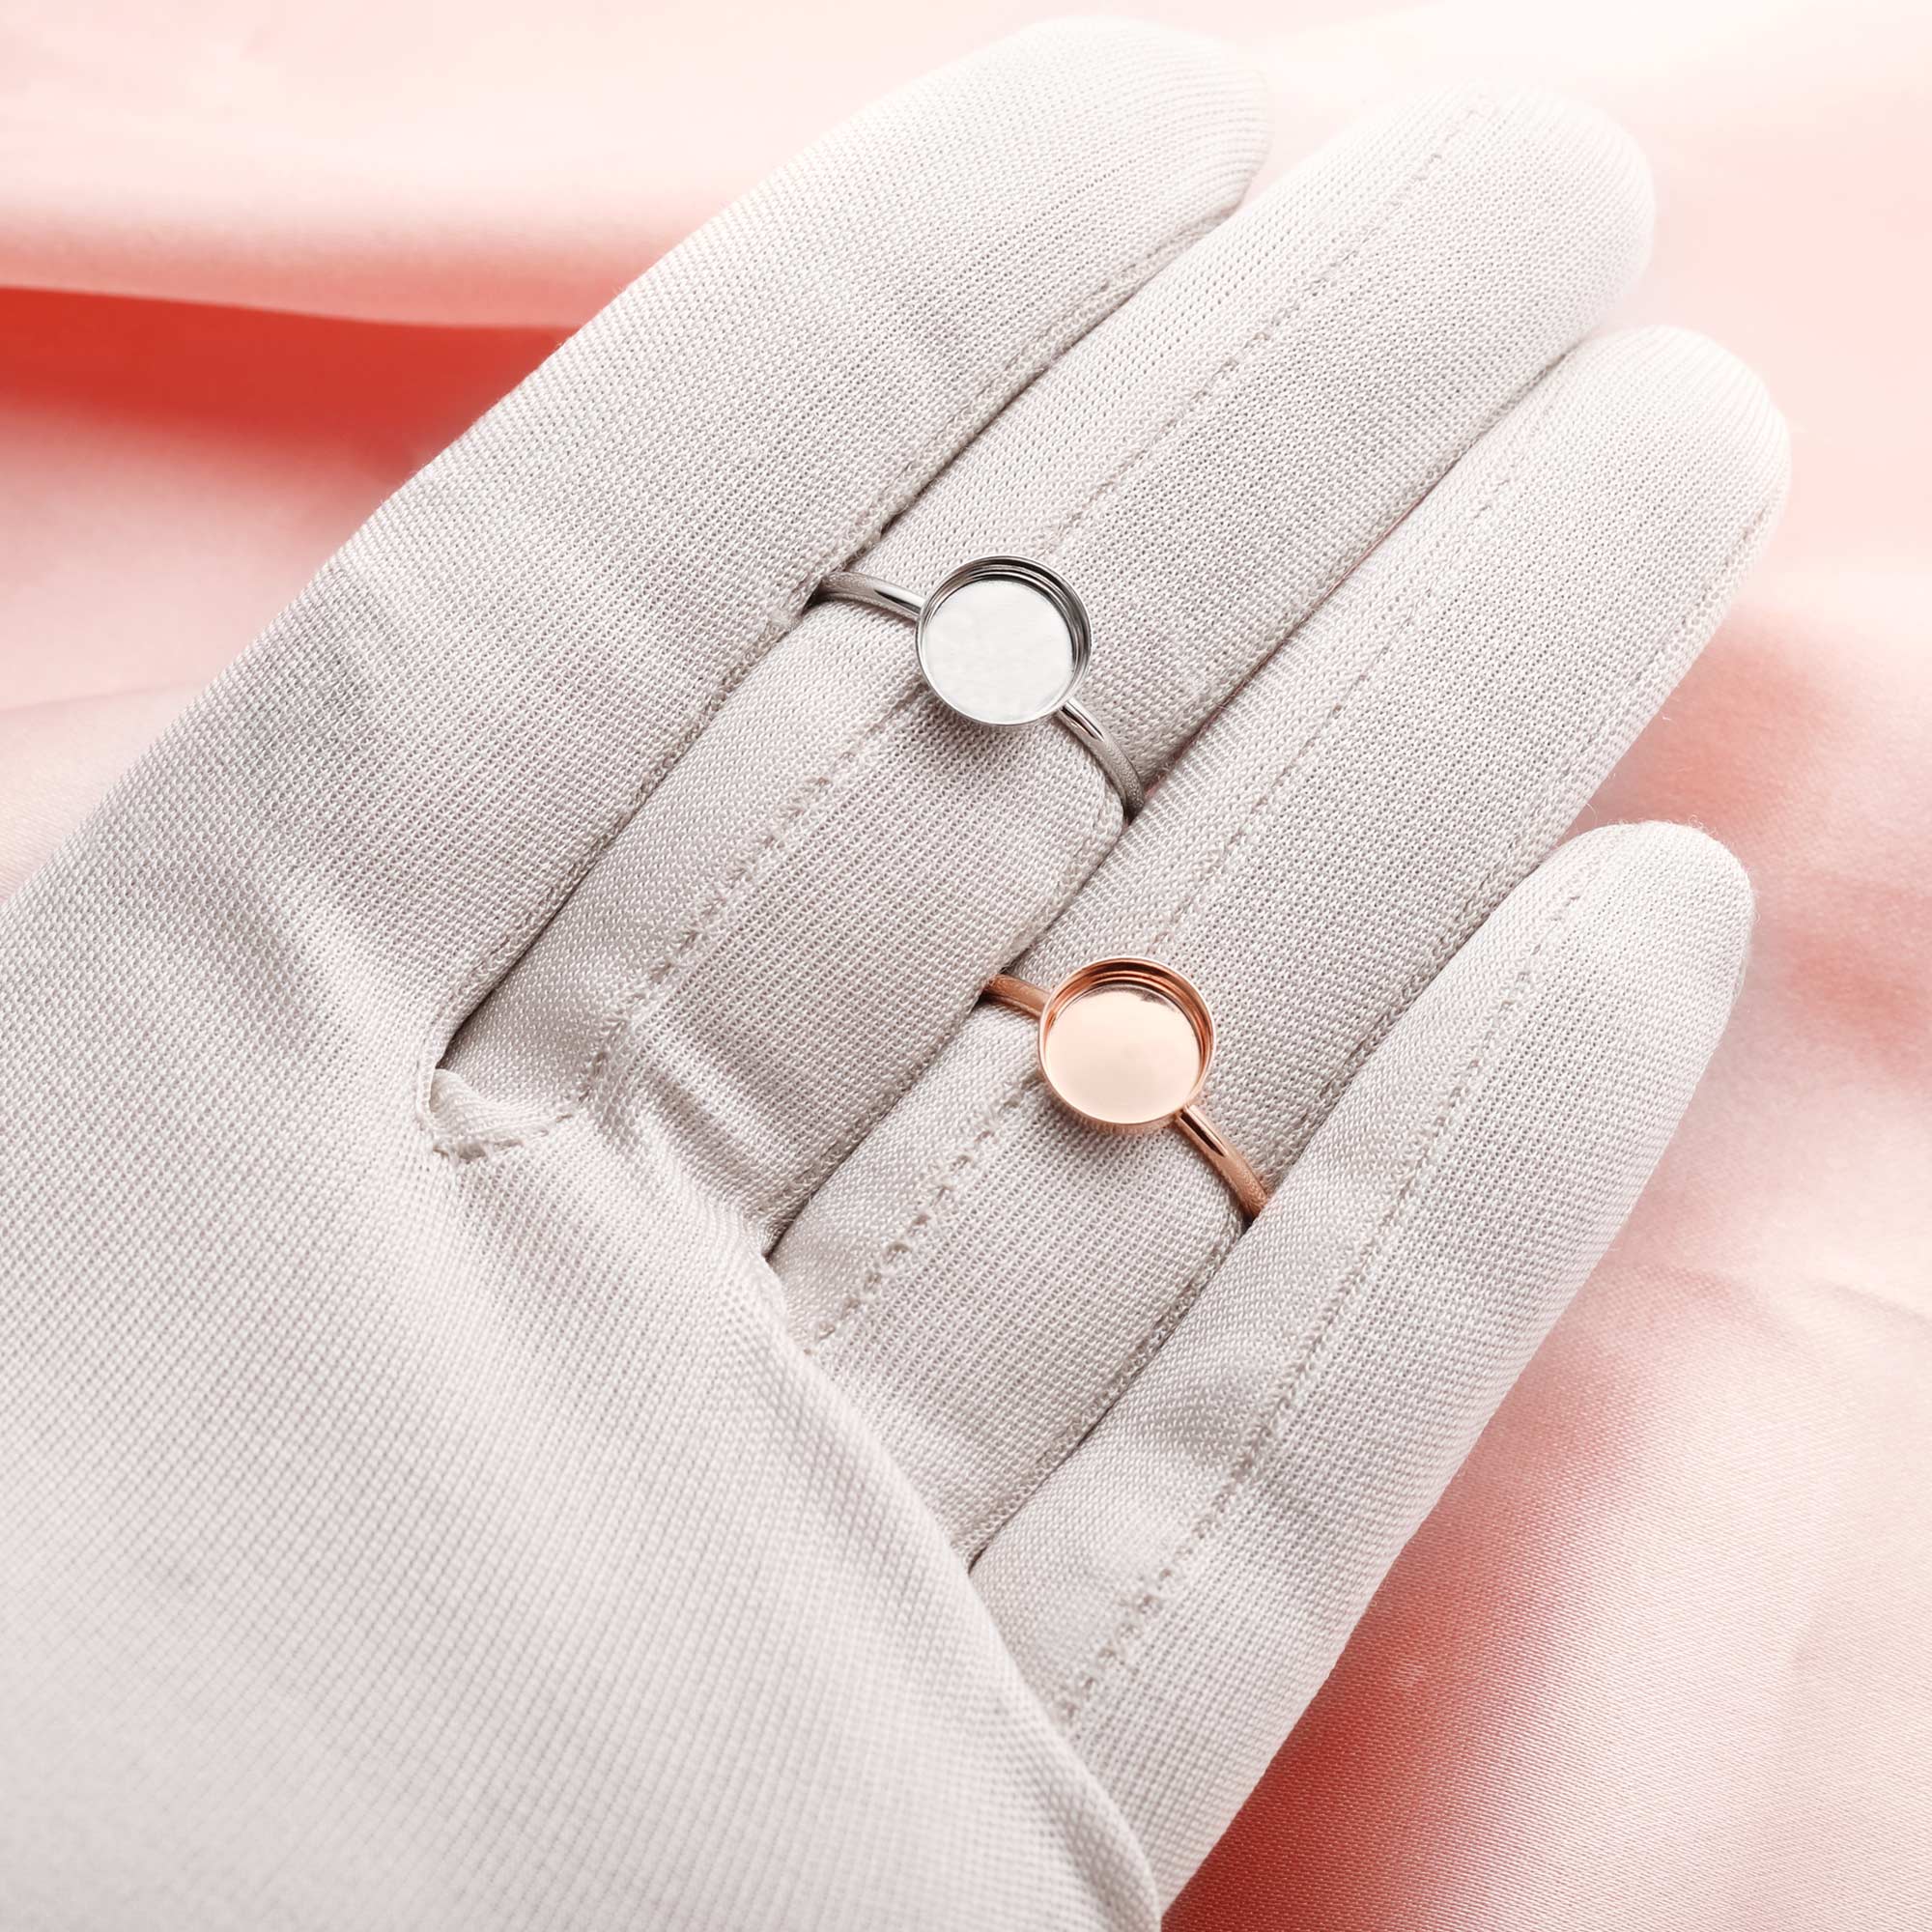 Round Breast Milk Keepsake Resin Ring Settings,Cup Bezel Ring,Solid 14K Gold Ring Bezel,Solid Back DIY Ring 1215041 - Click Image to Close